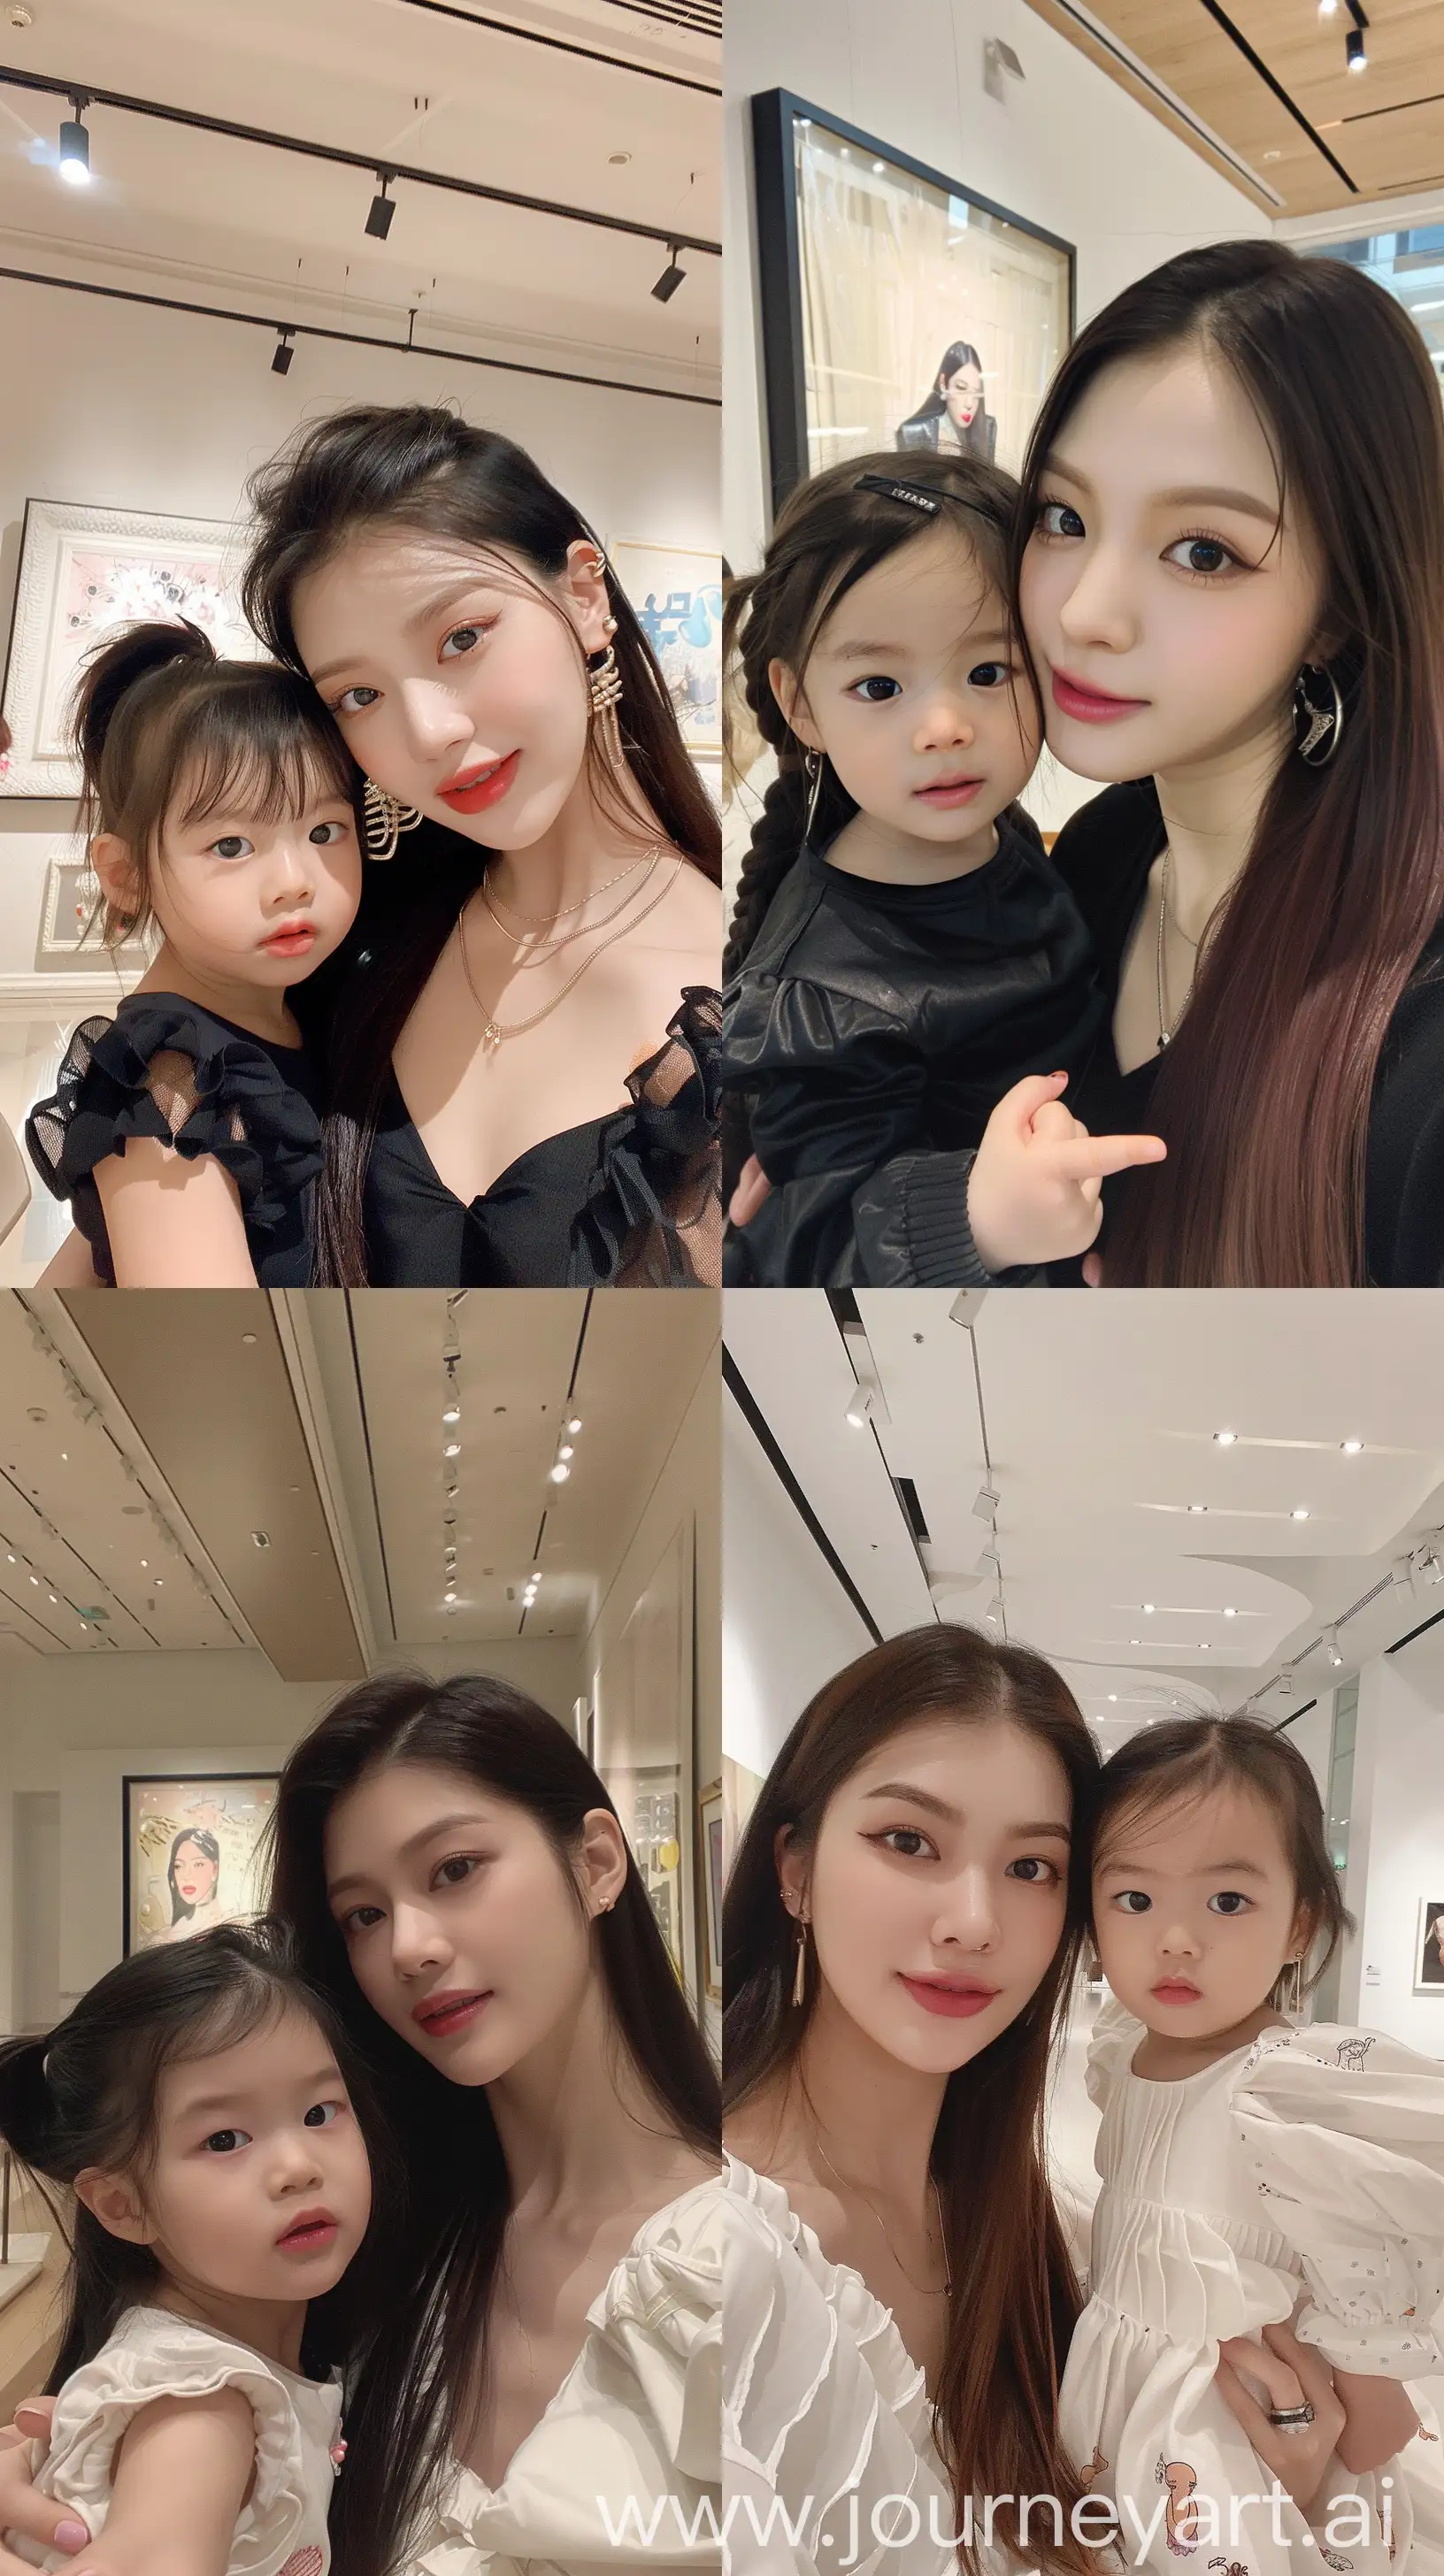 Blackpinks-Jennie-Aesthetic-Selfie-with-Young-Daughter-in-Modern-Art-Gallery